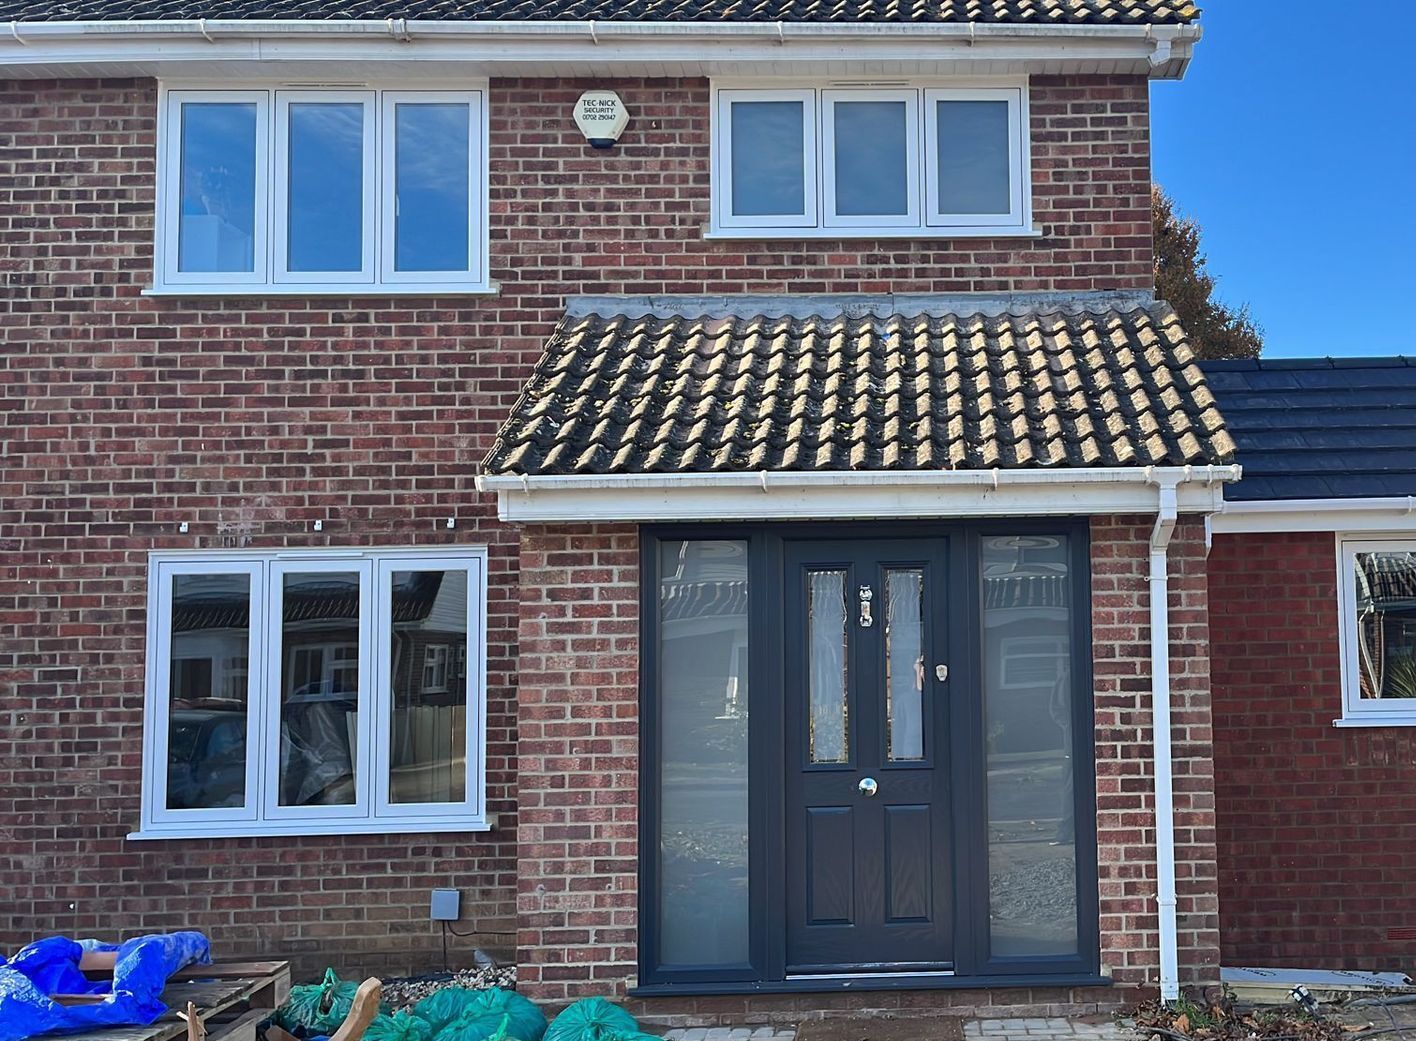 New double glazed windows and doors installed by Aspen Home Improvements